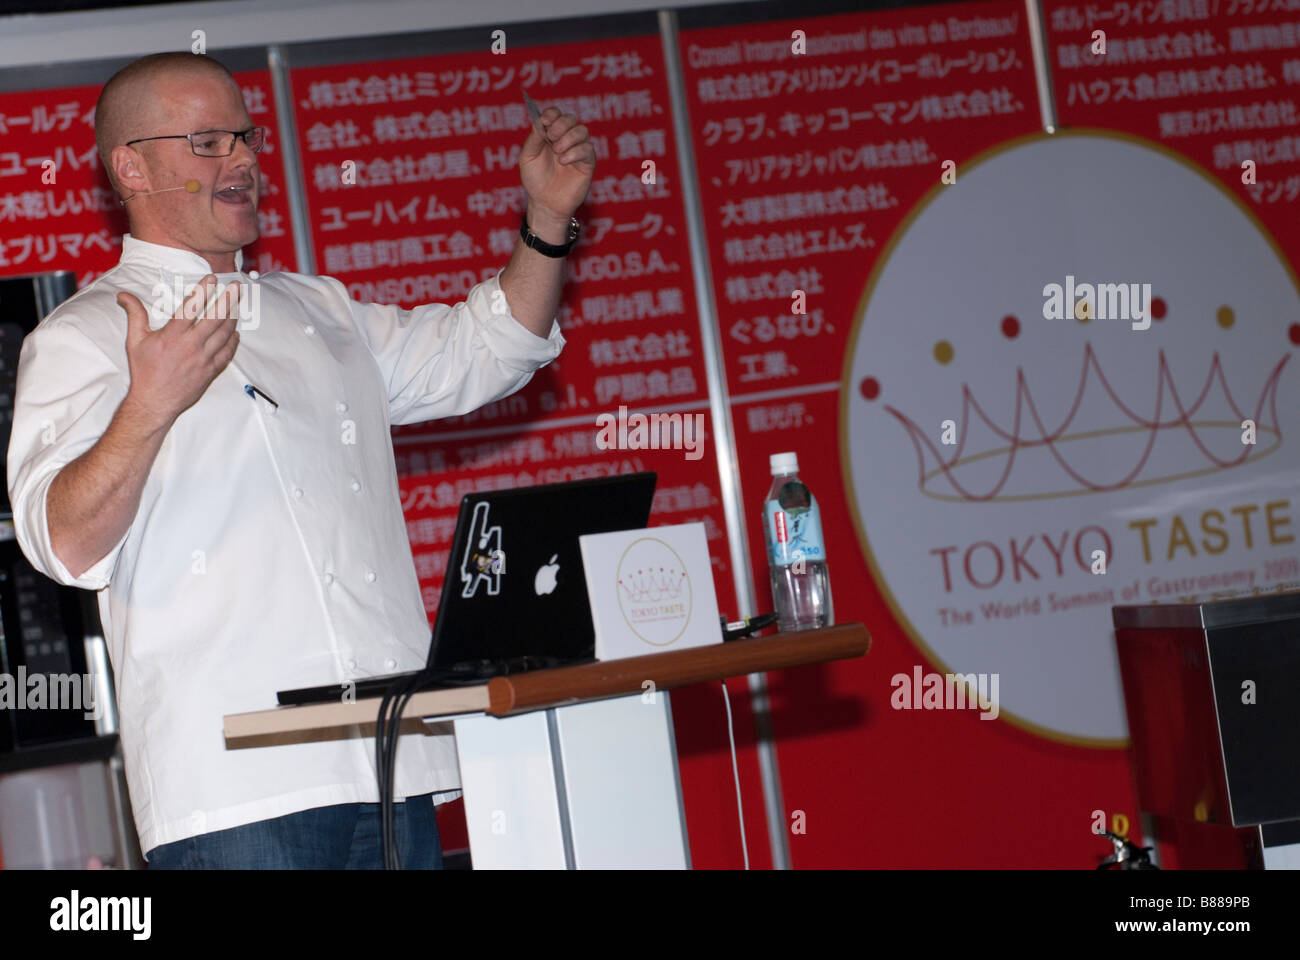 Chef Heston Blumenthal gives a speech and demonstration at the Tokyo Taste The World Summit of Gastronomy 2009, 10 February 2009 Stock Photo